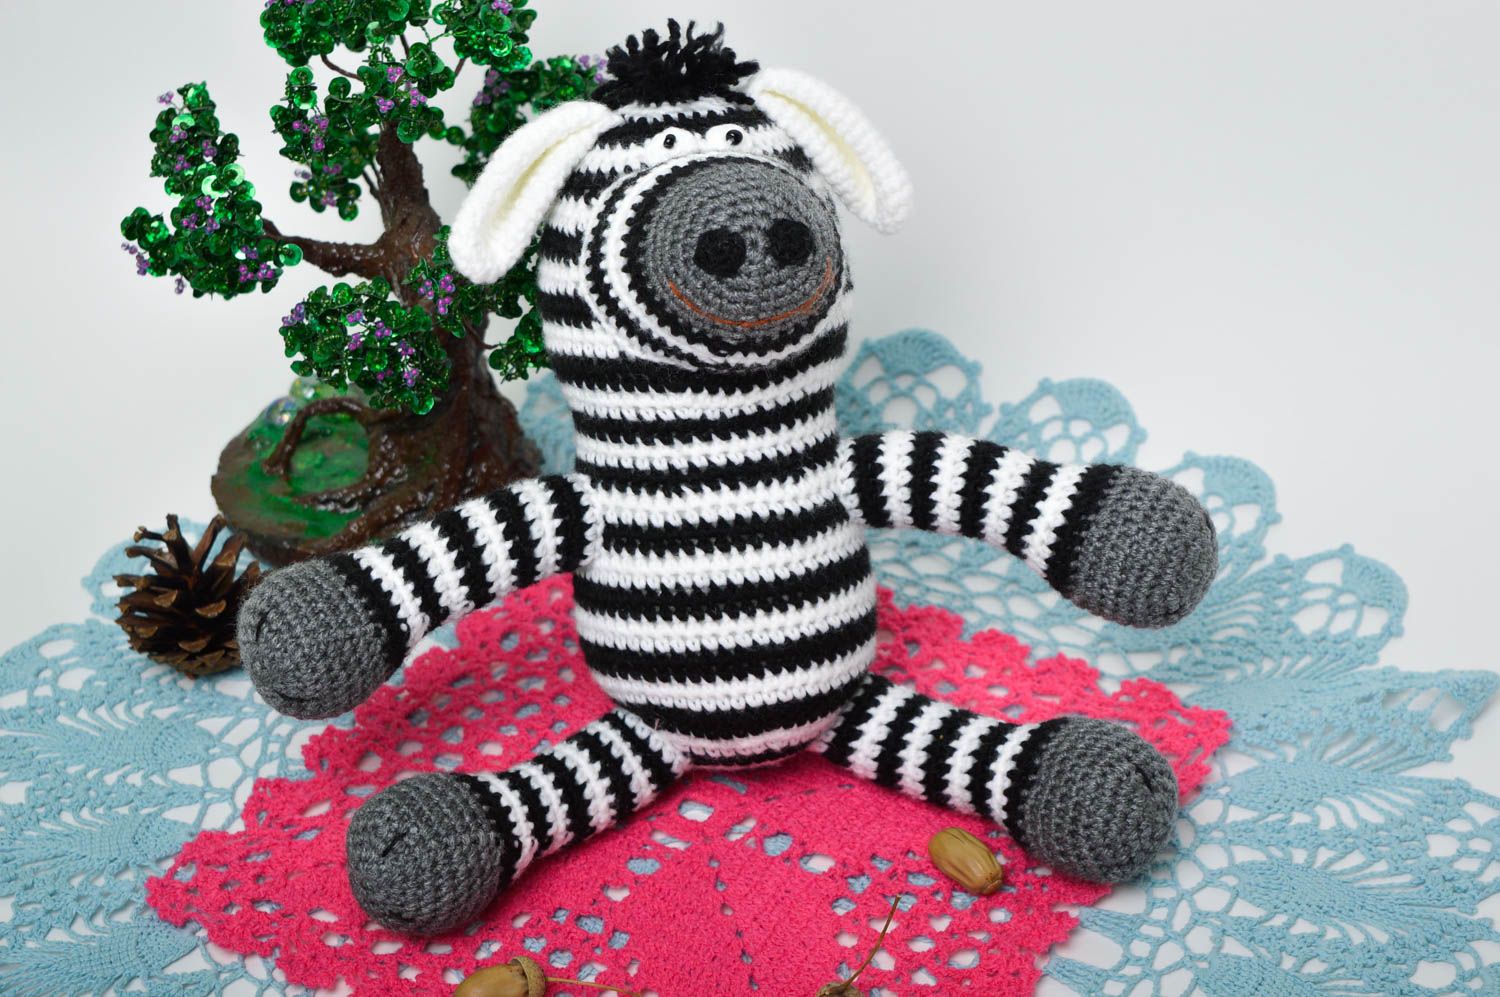 Handmade toy small zebra soft toy decorative crocheted toy striped crocheted toy photo 1